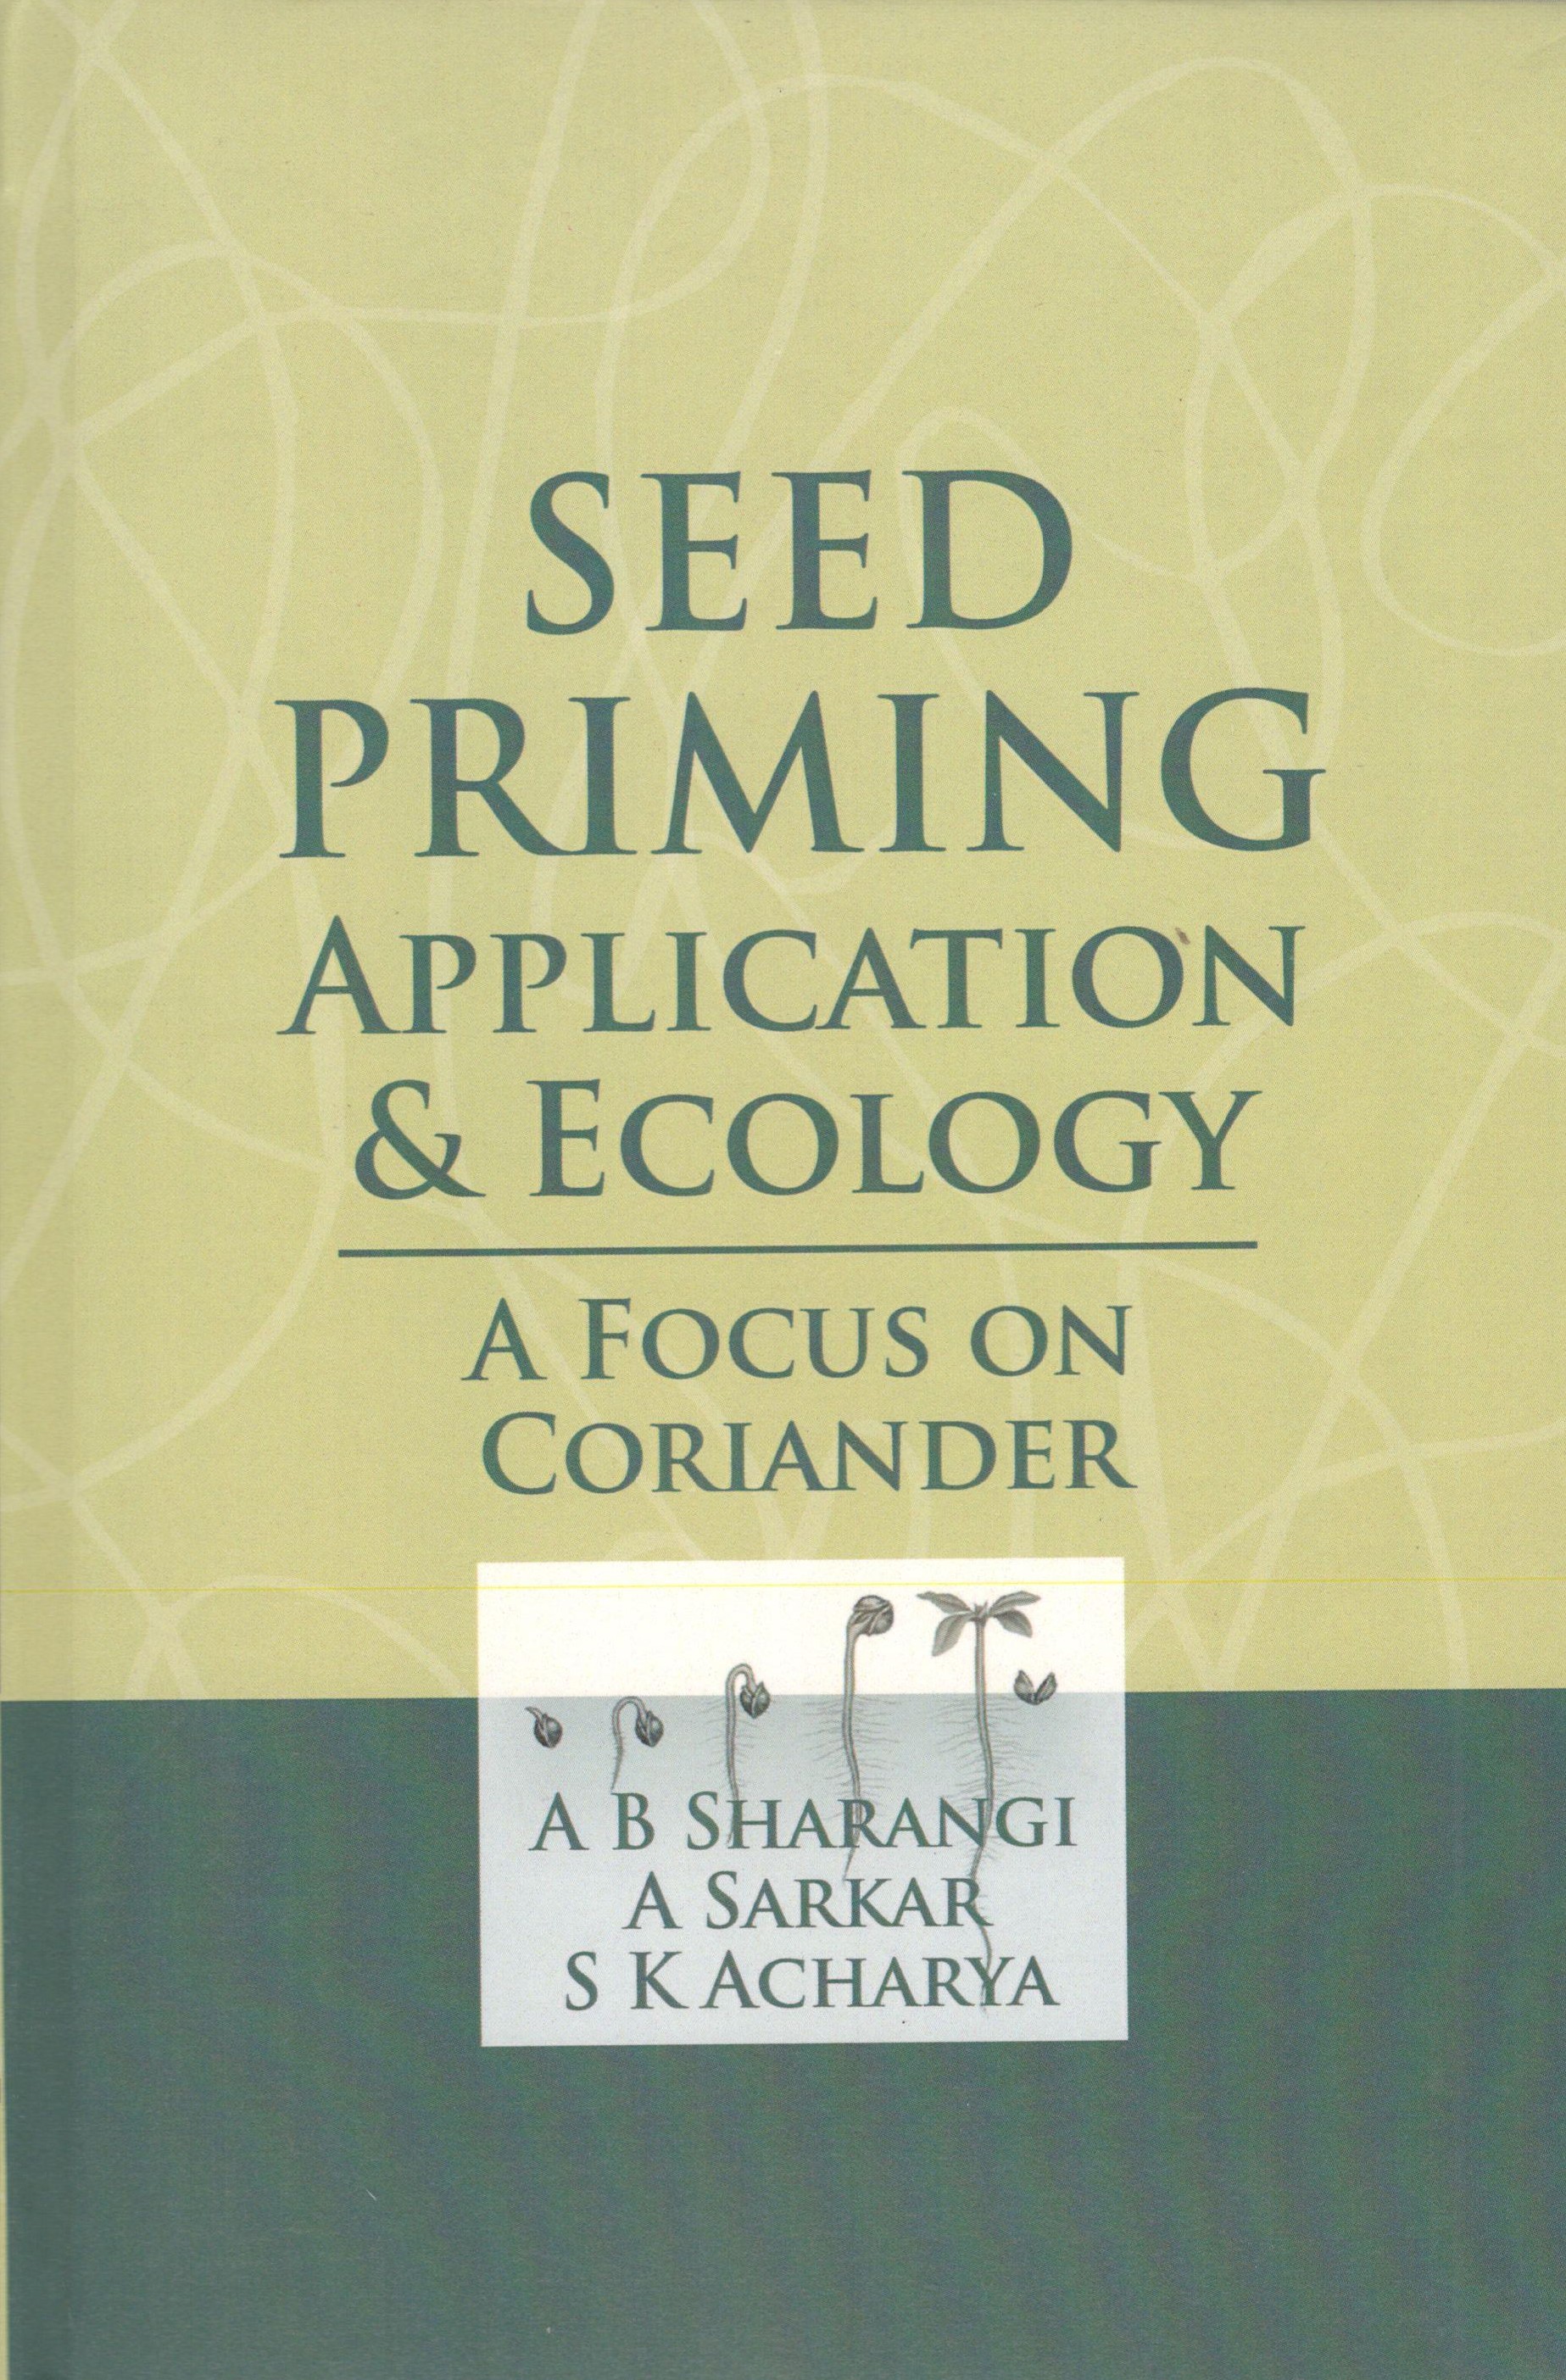 Seed Priming Application & Ecology a Focus on Coriander